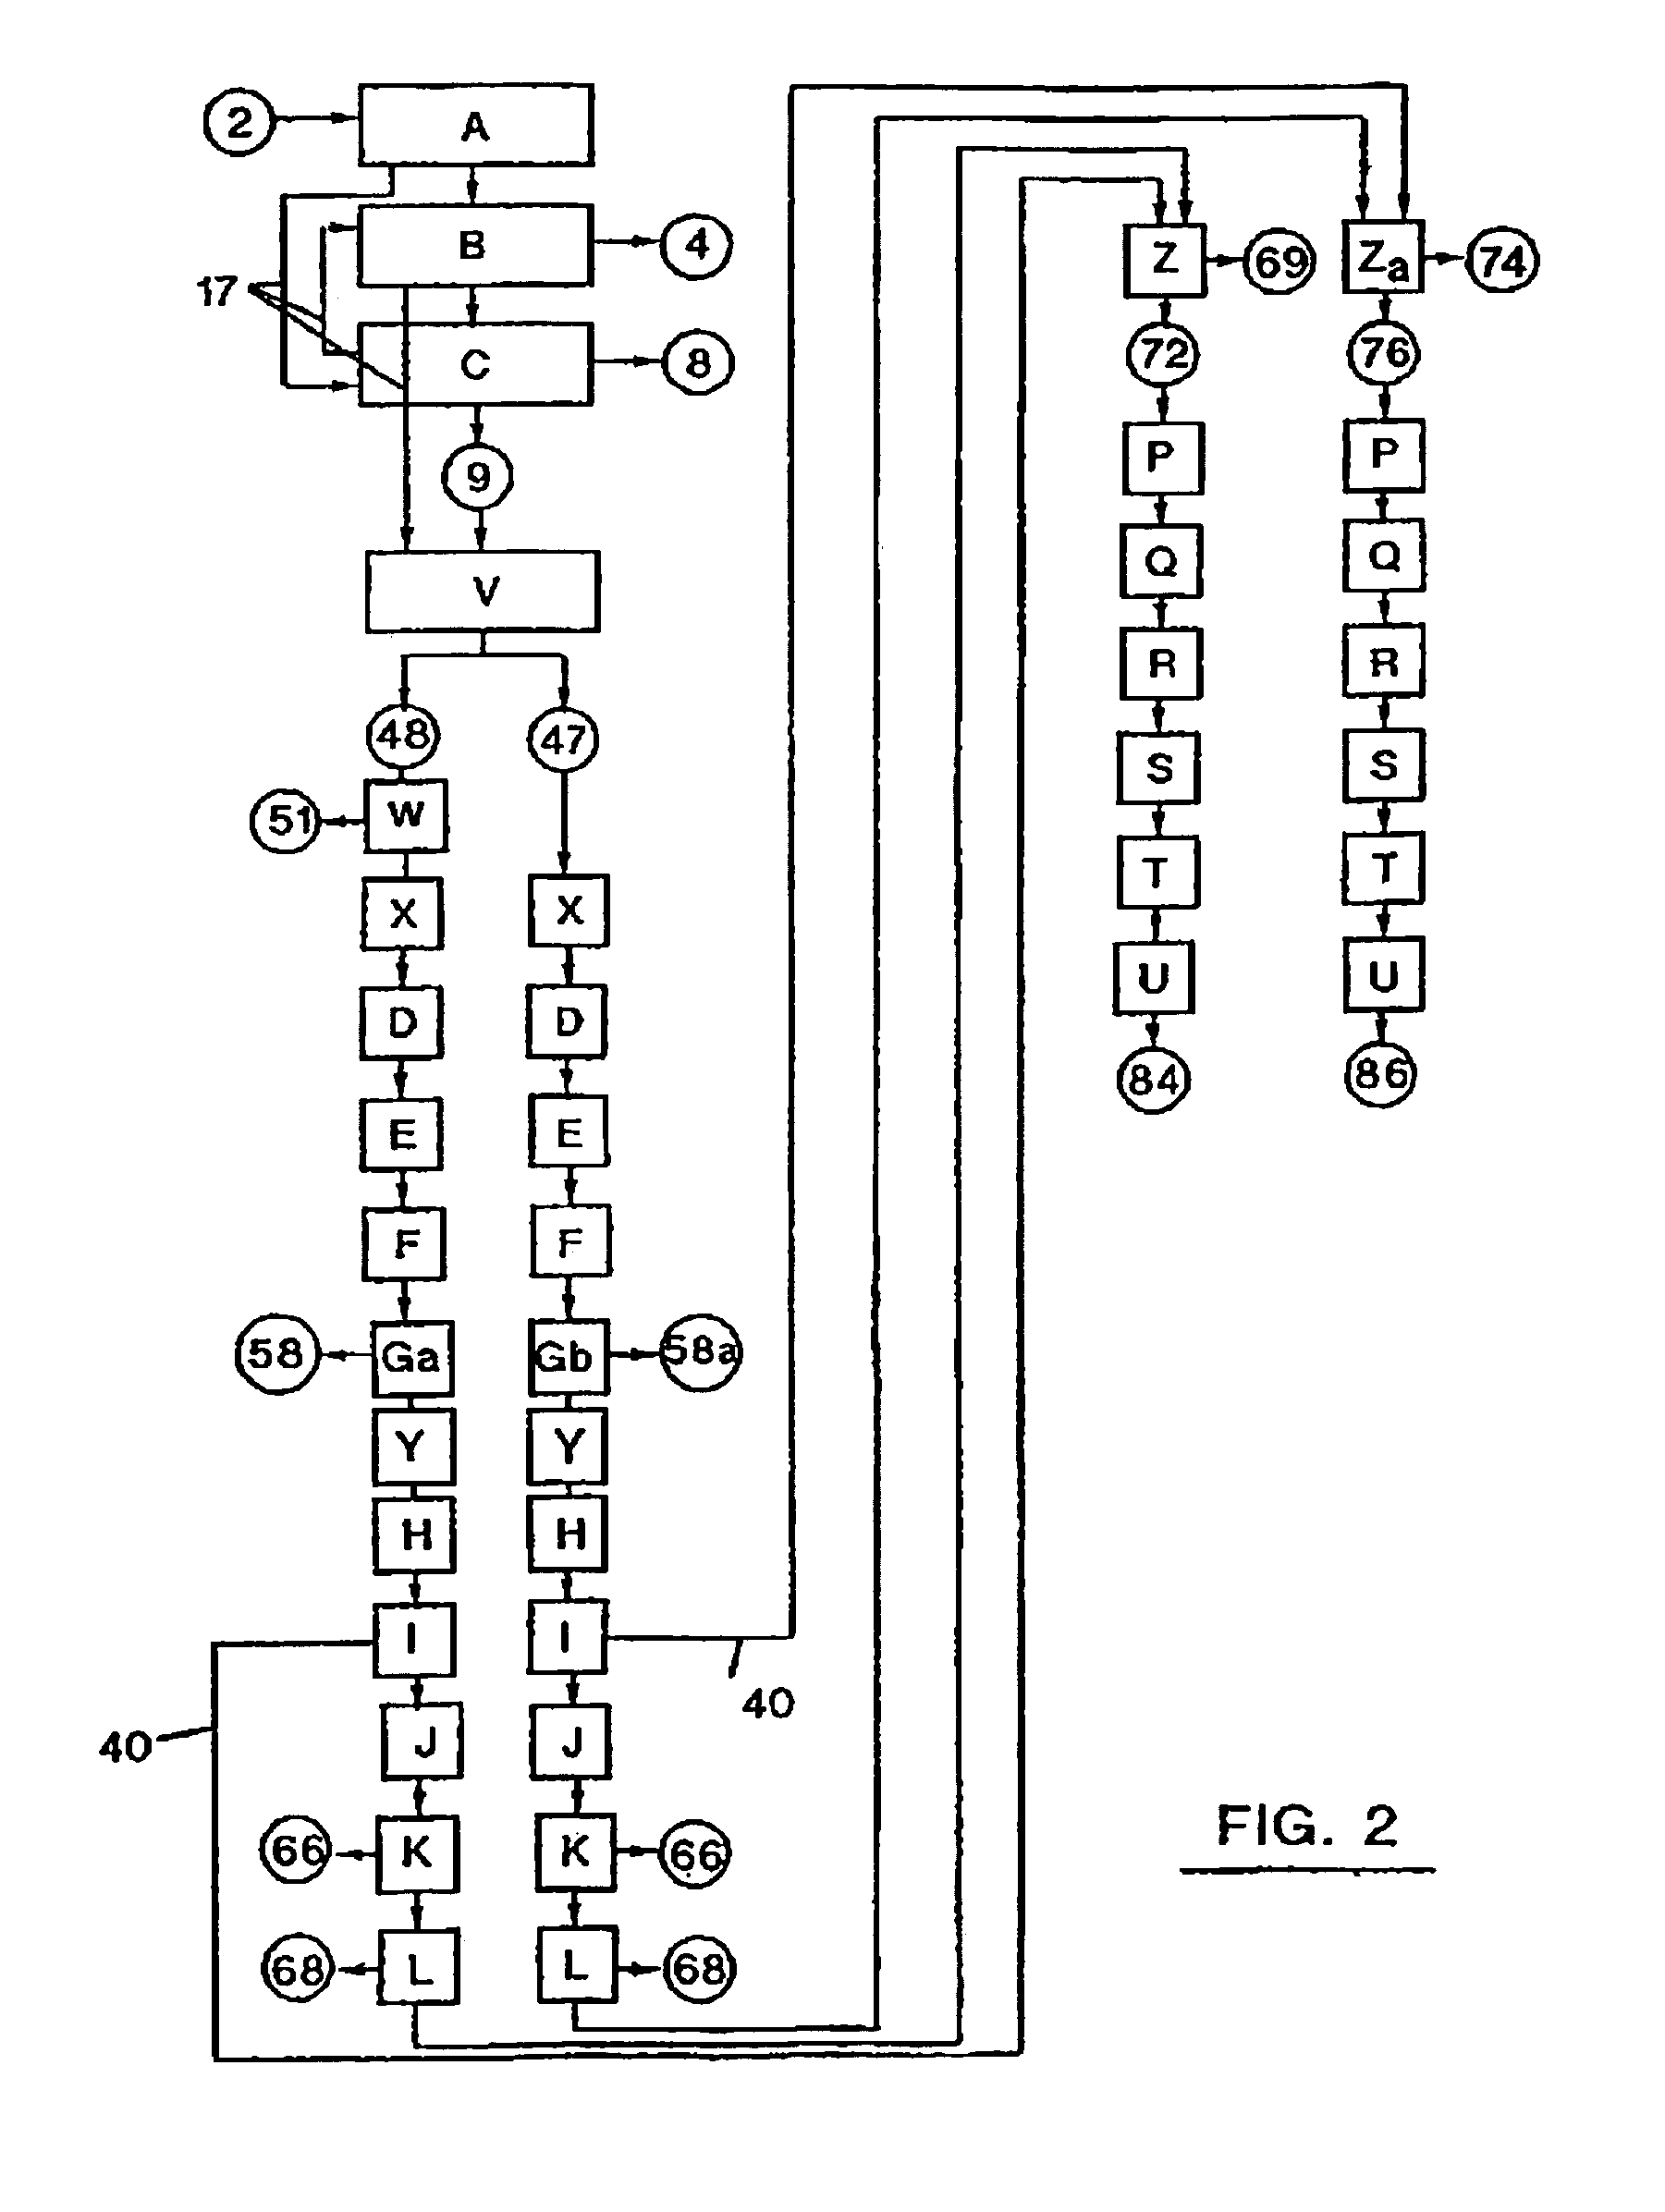 Method and plant for separating polymeric materials